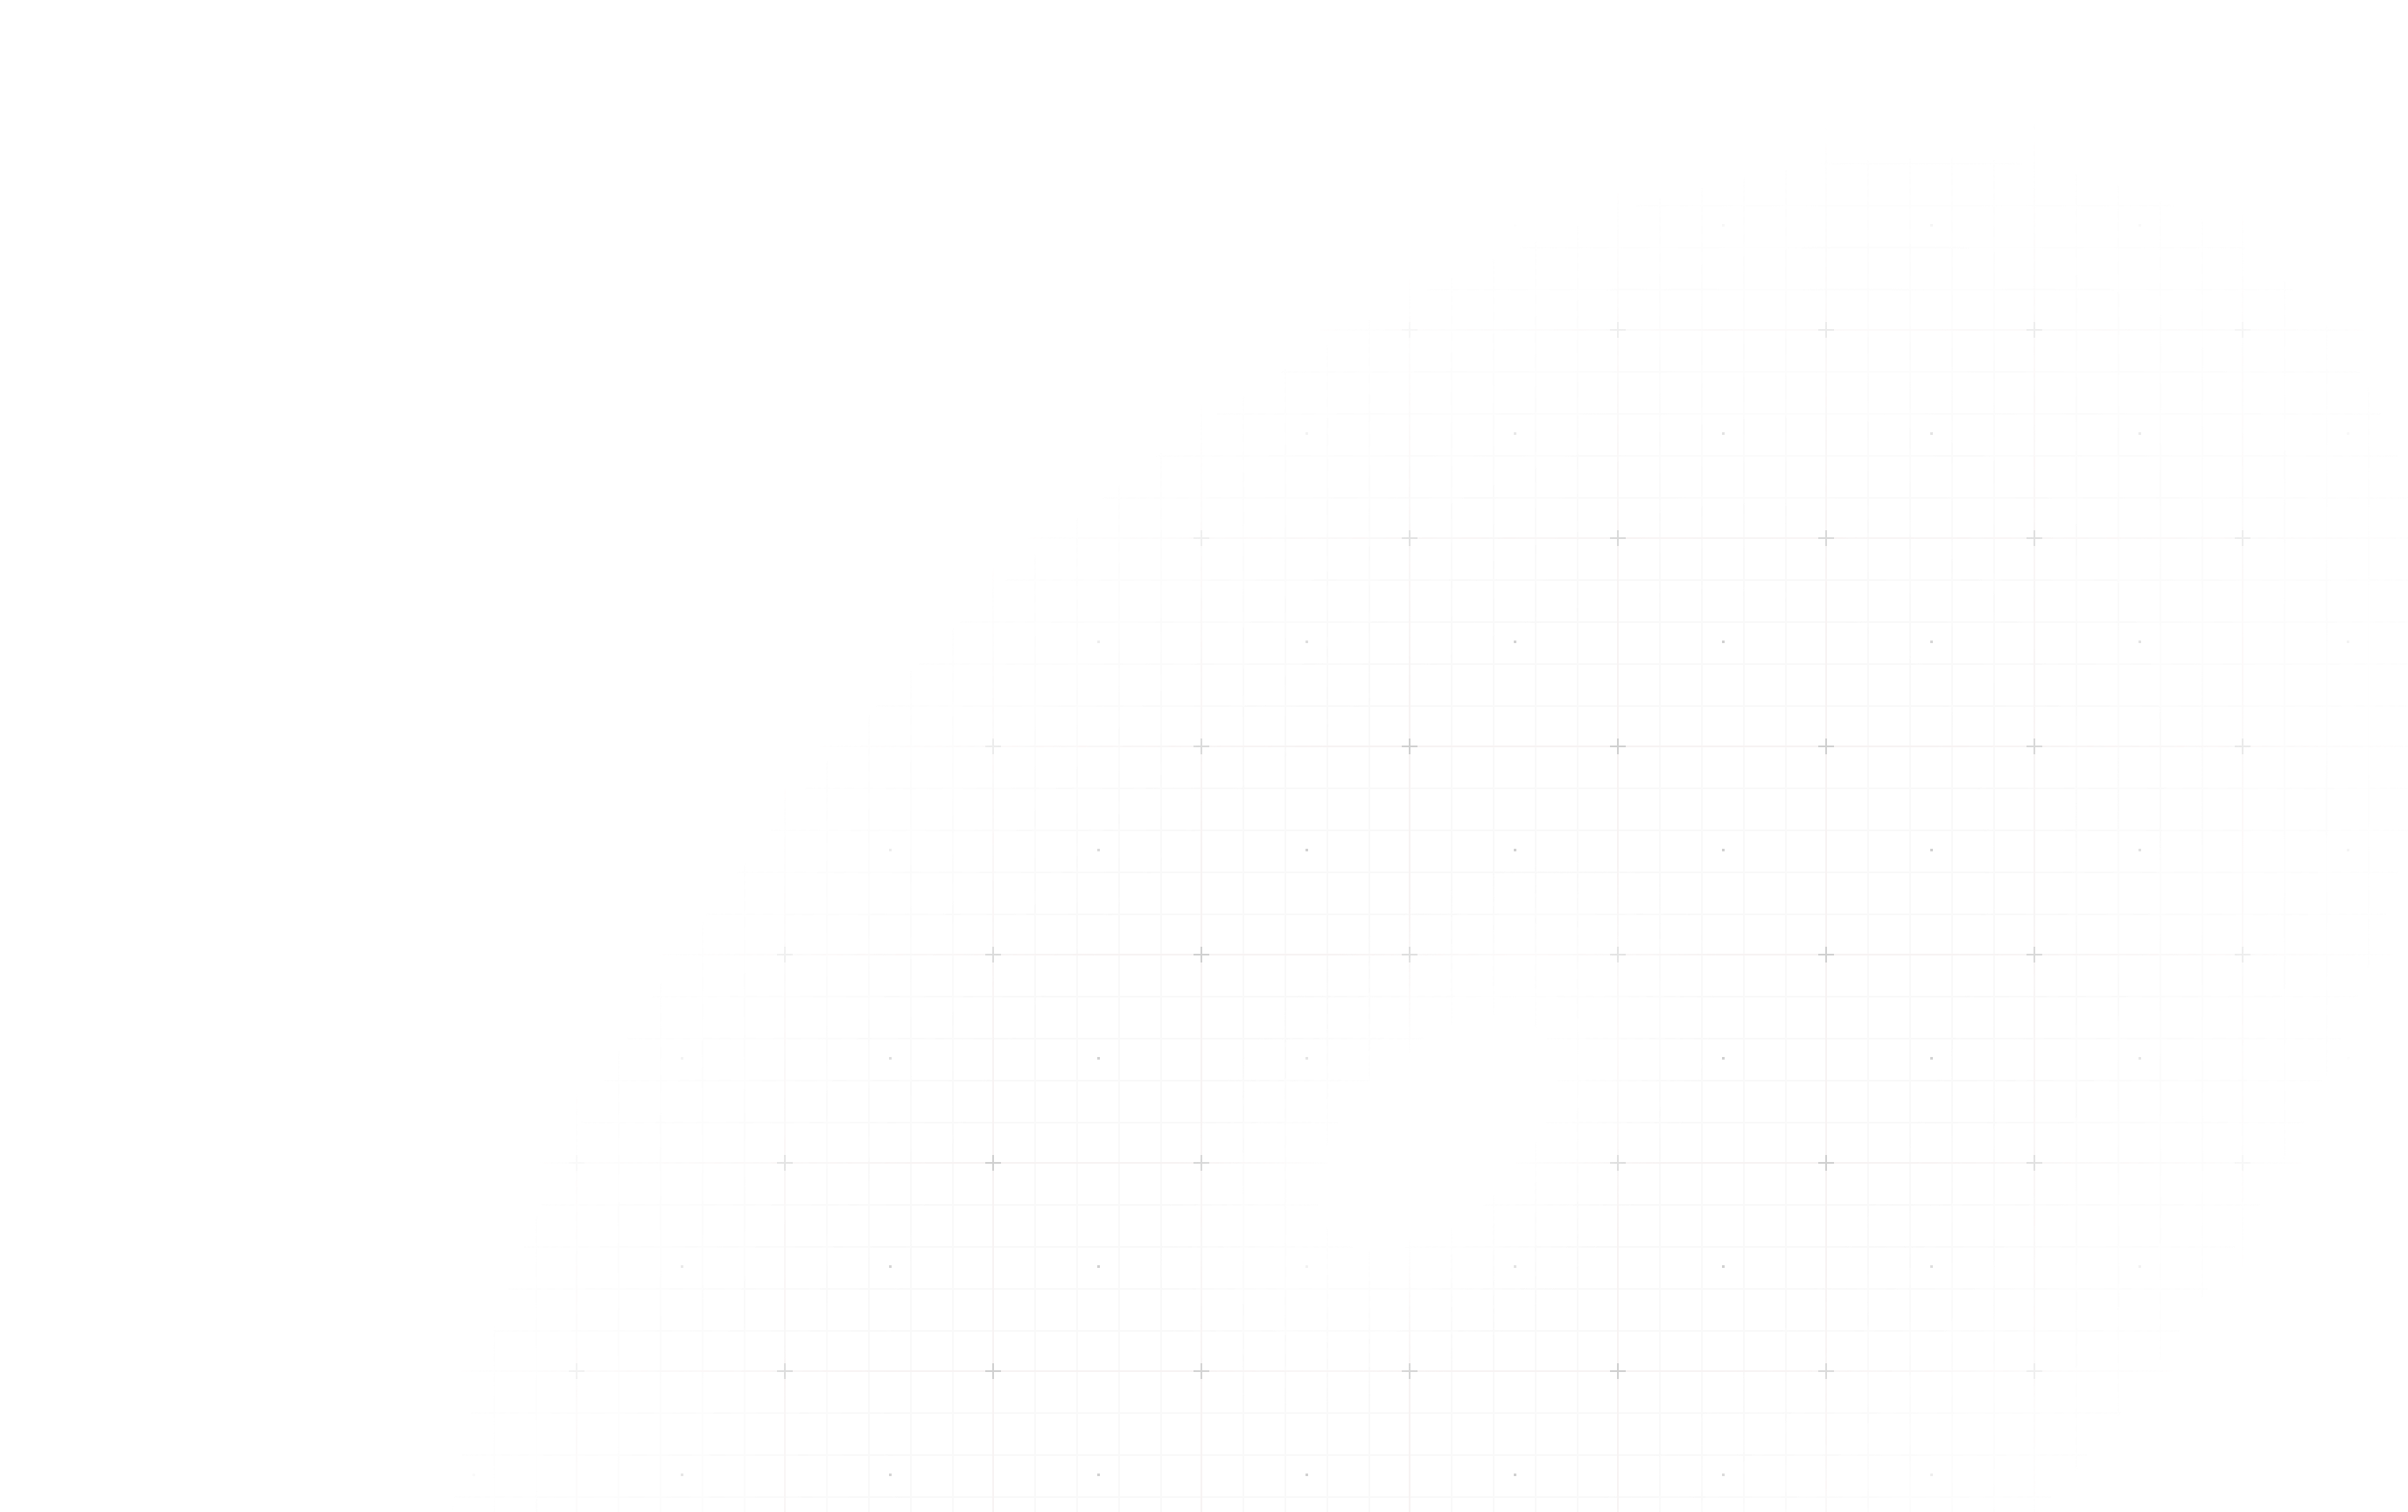 Background image for the section with highlighted squares and dots